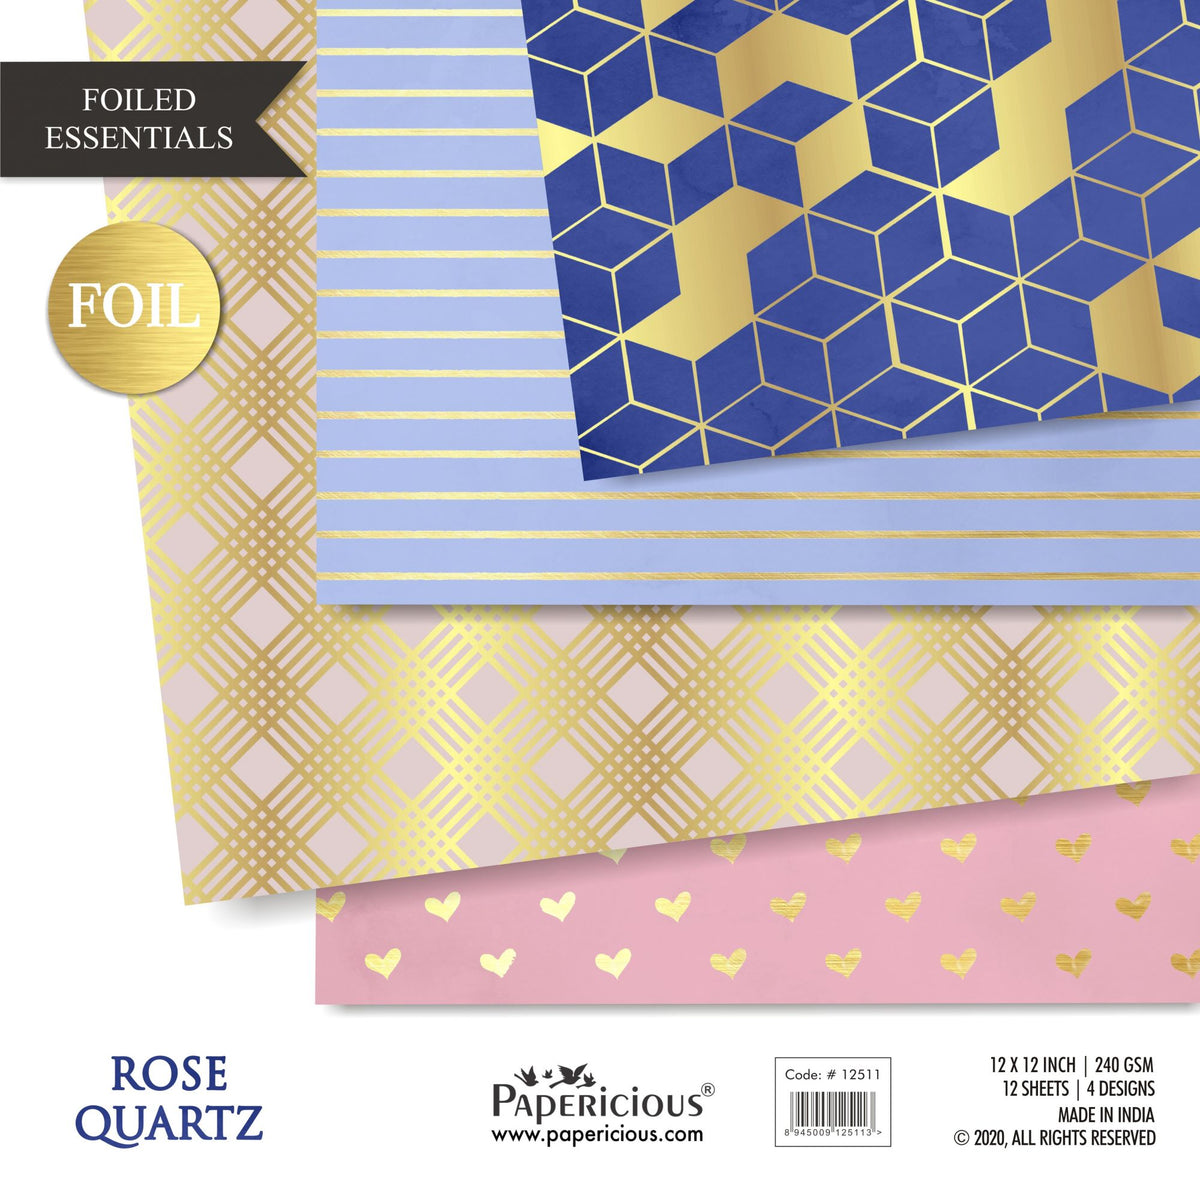 Papericious - Rose Quartz - Golden Foiled Pattern Scrapbook Papers 12x12 inch / 12 sheets